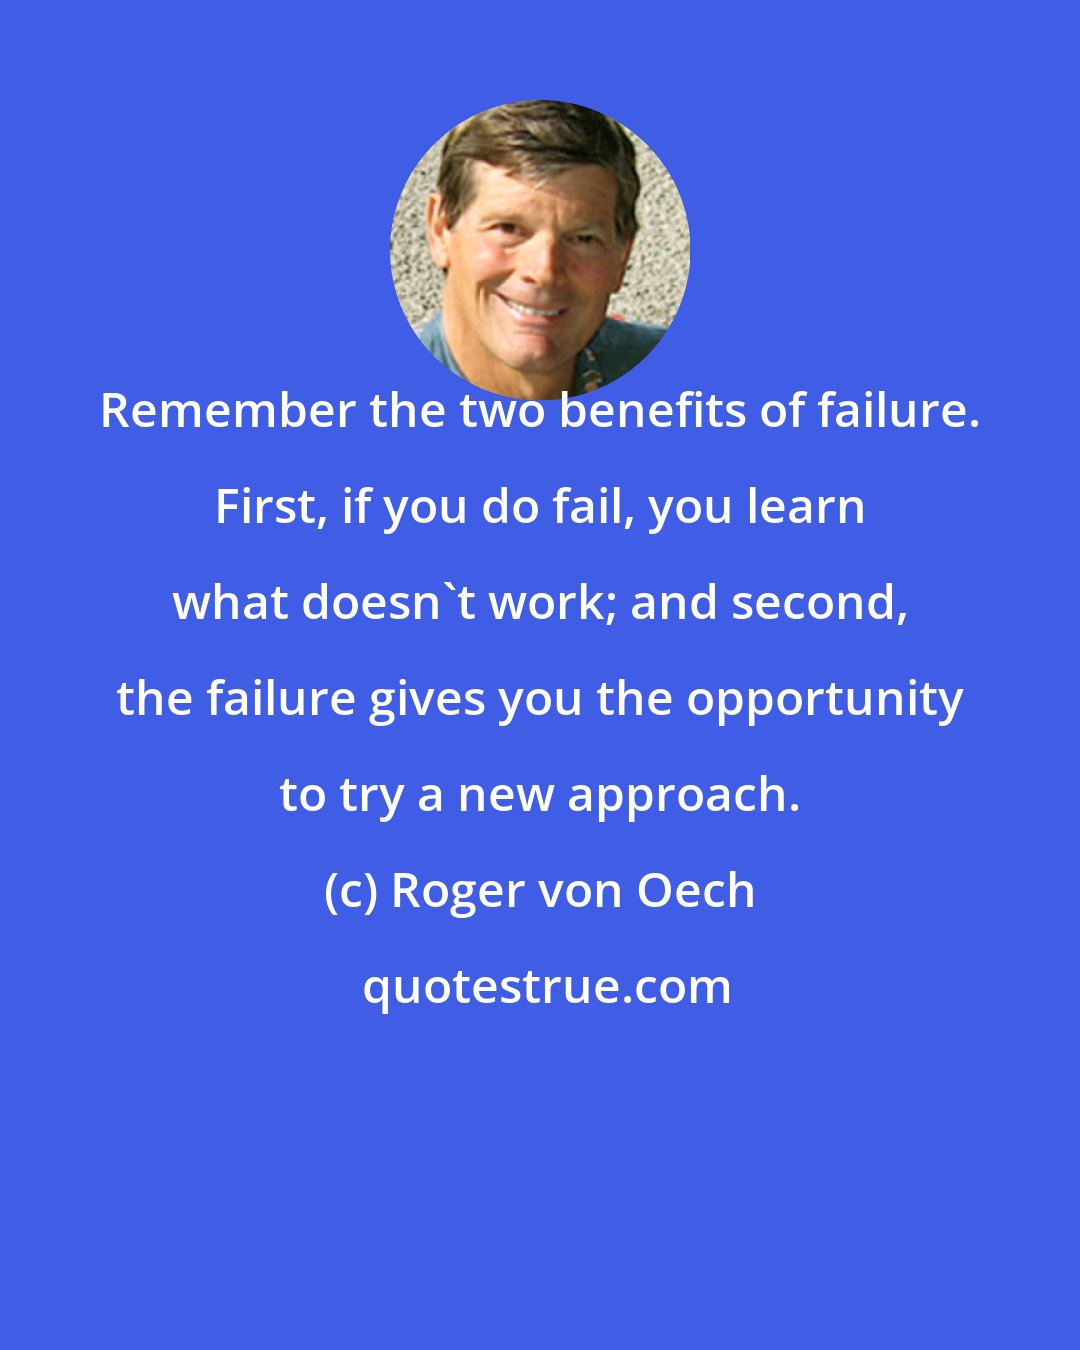 Roger von Oech: Remember the two benefits of failure. First, if you do fail, you learn what doesn't work; and second, the failure gives you the opportunity to try a new approach.